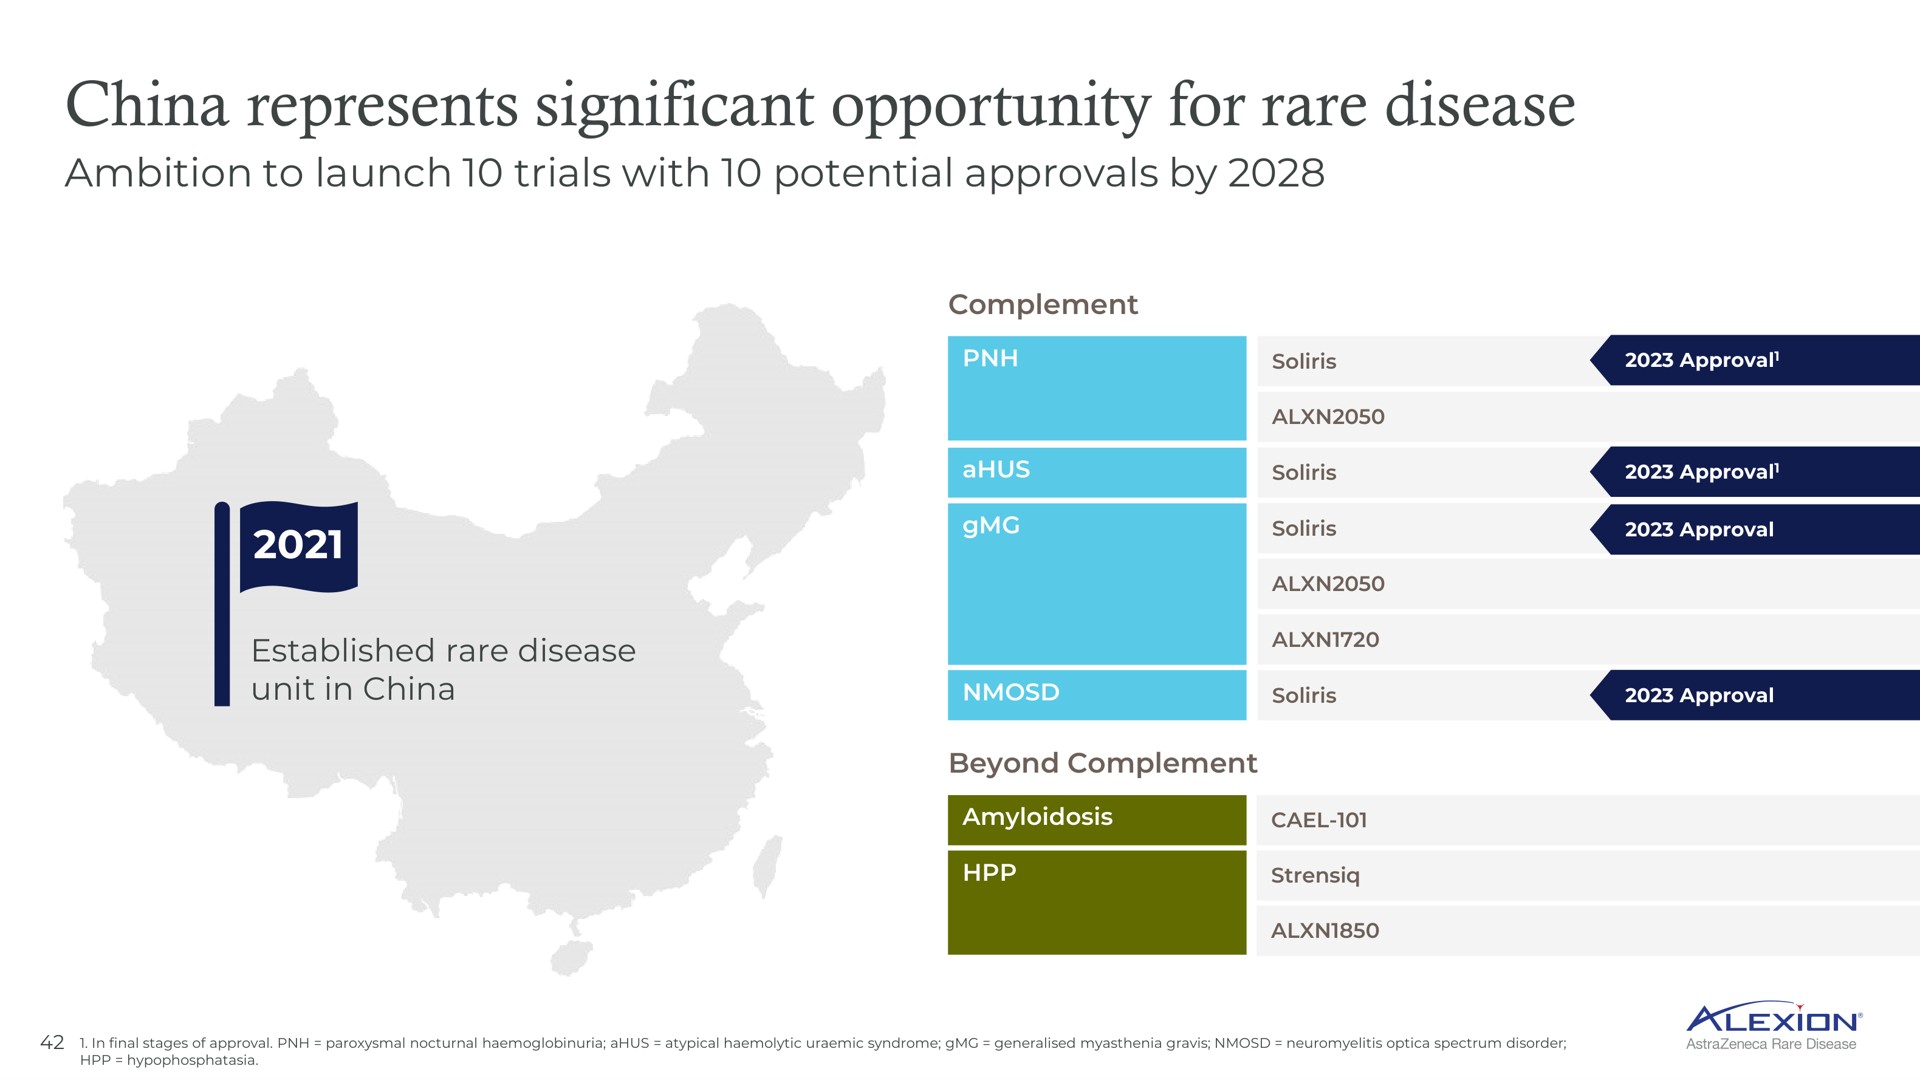 china represents significant opportunity for rare disease | AstraZeneca